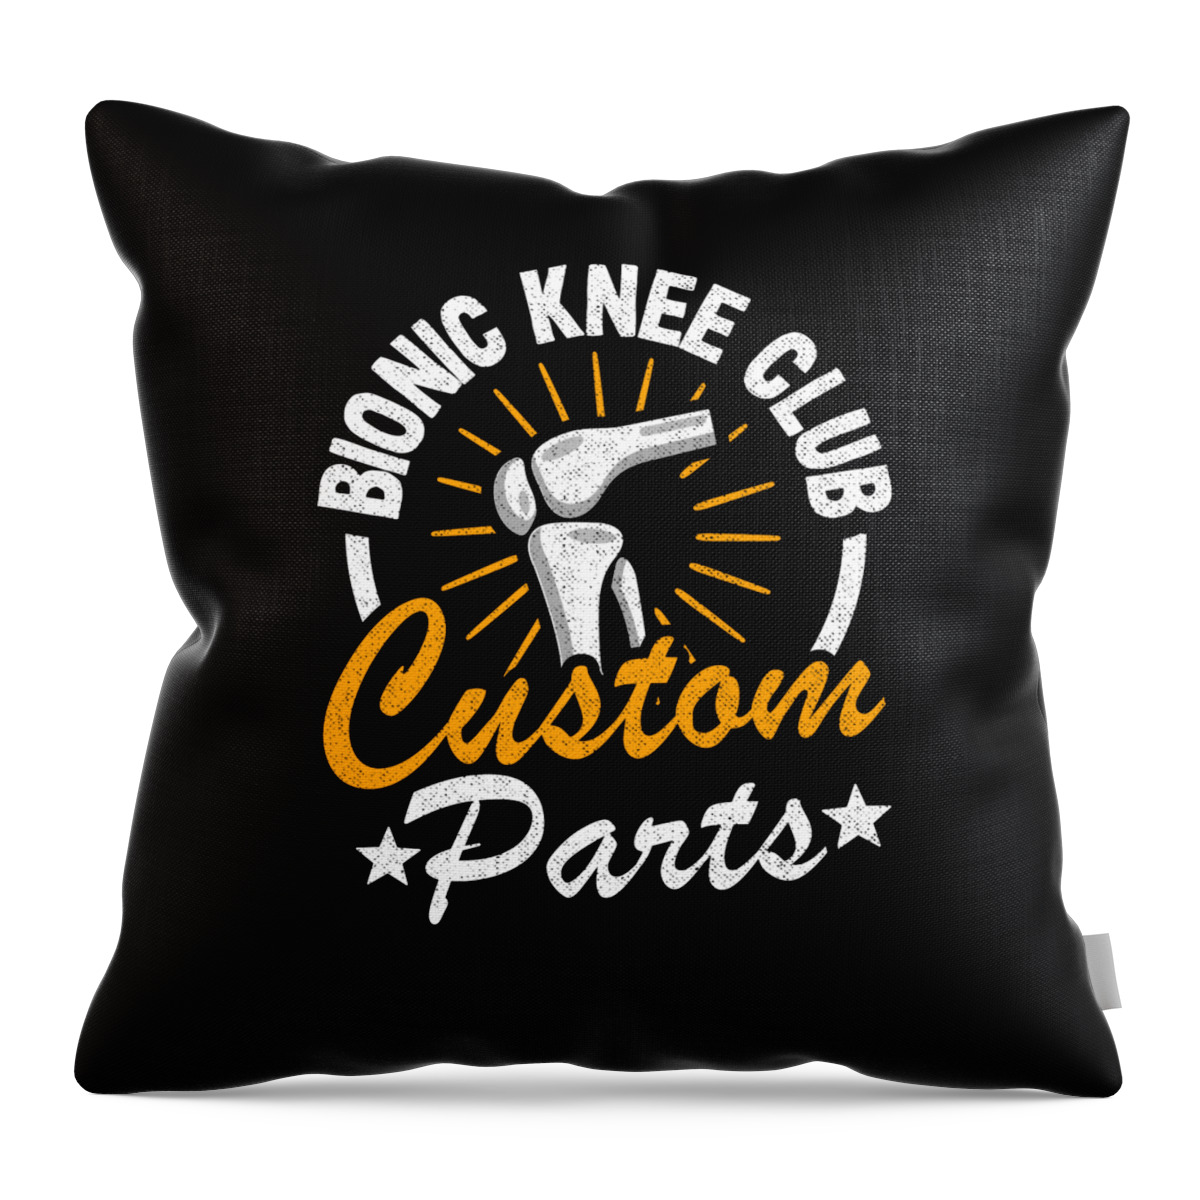 Bionic Knee Club Member Knee Replacement Surgery Funny Throw Pillow by Lisa  Stronzi - Pixels